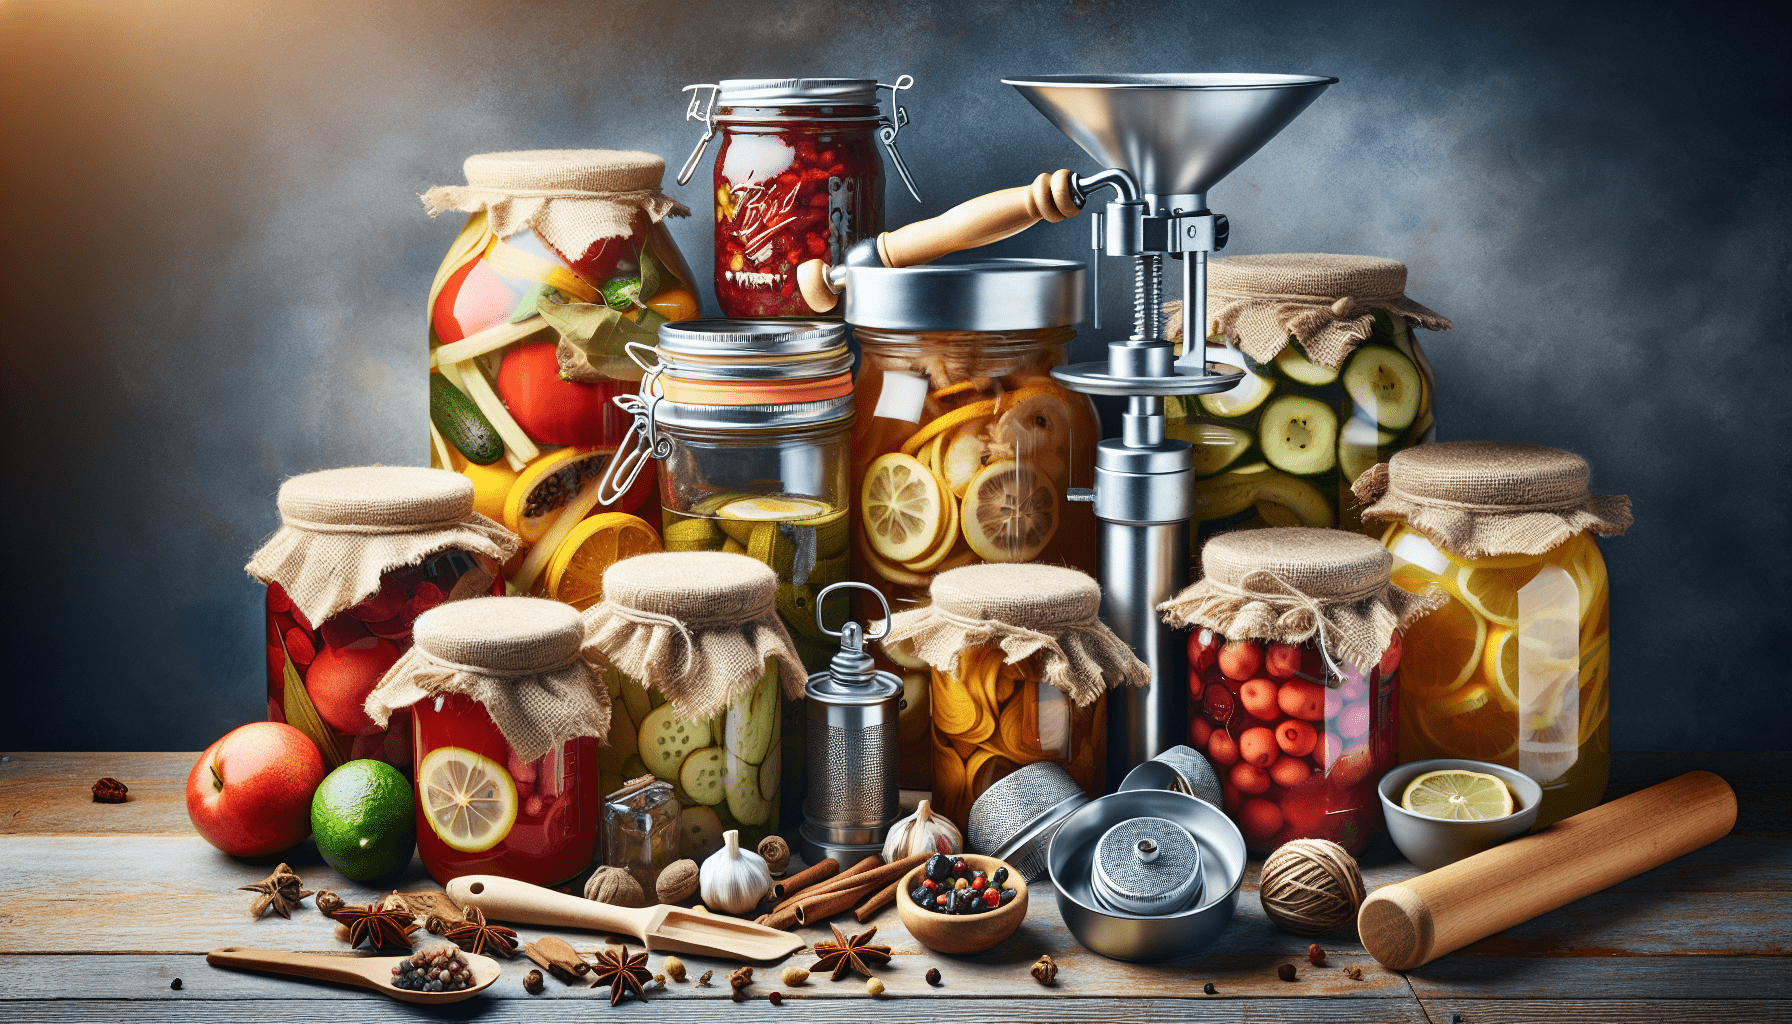 What Are The Basics Of Canning And Preserving At Home?